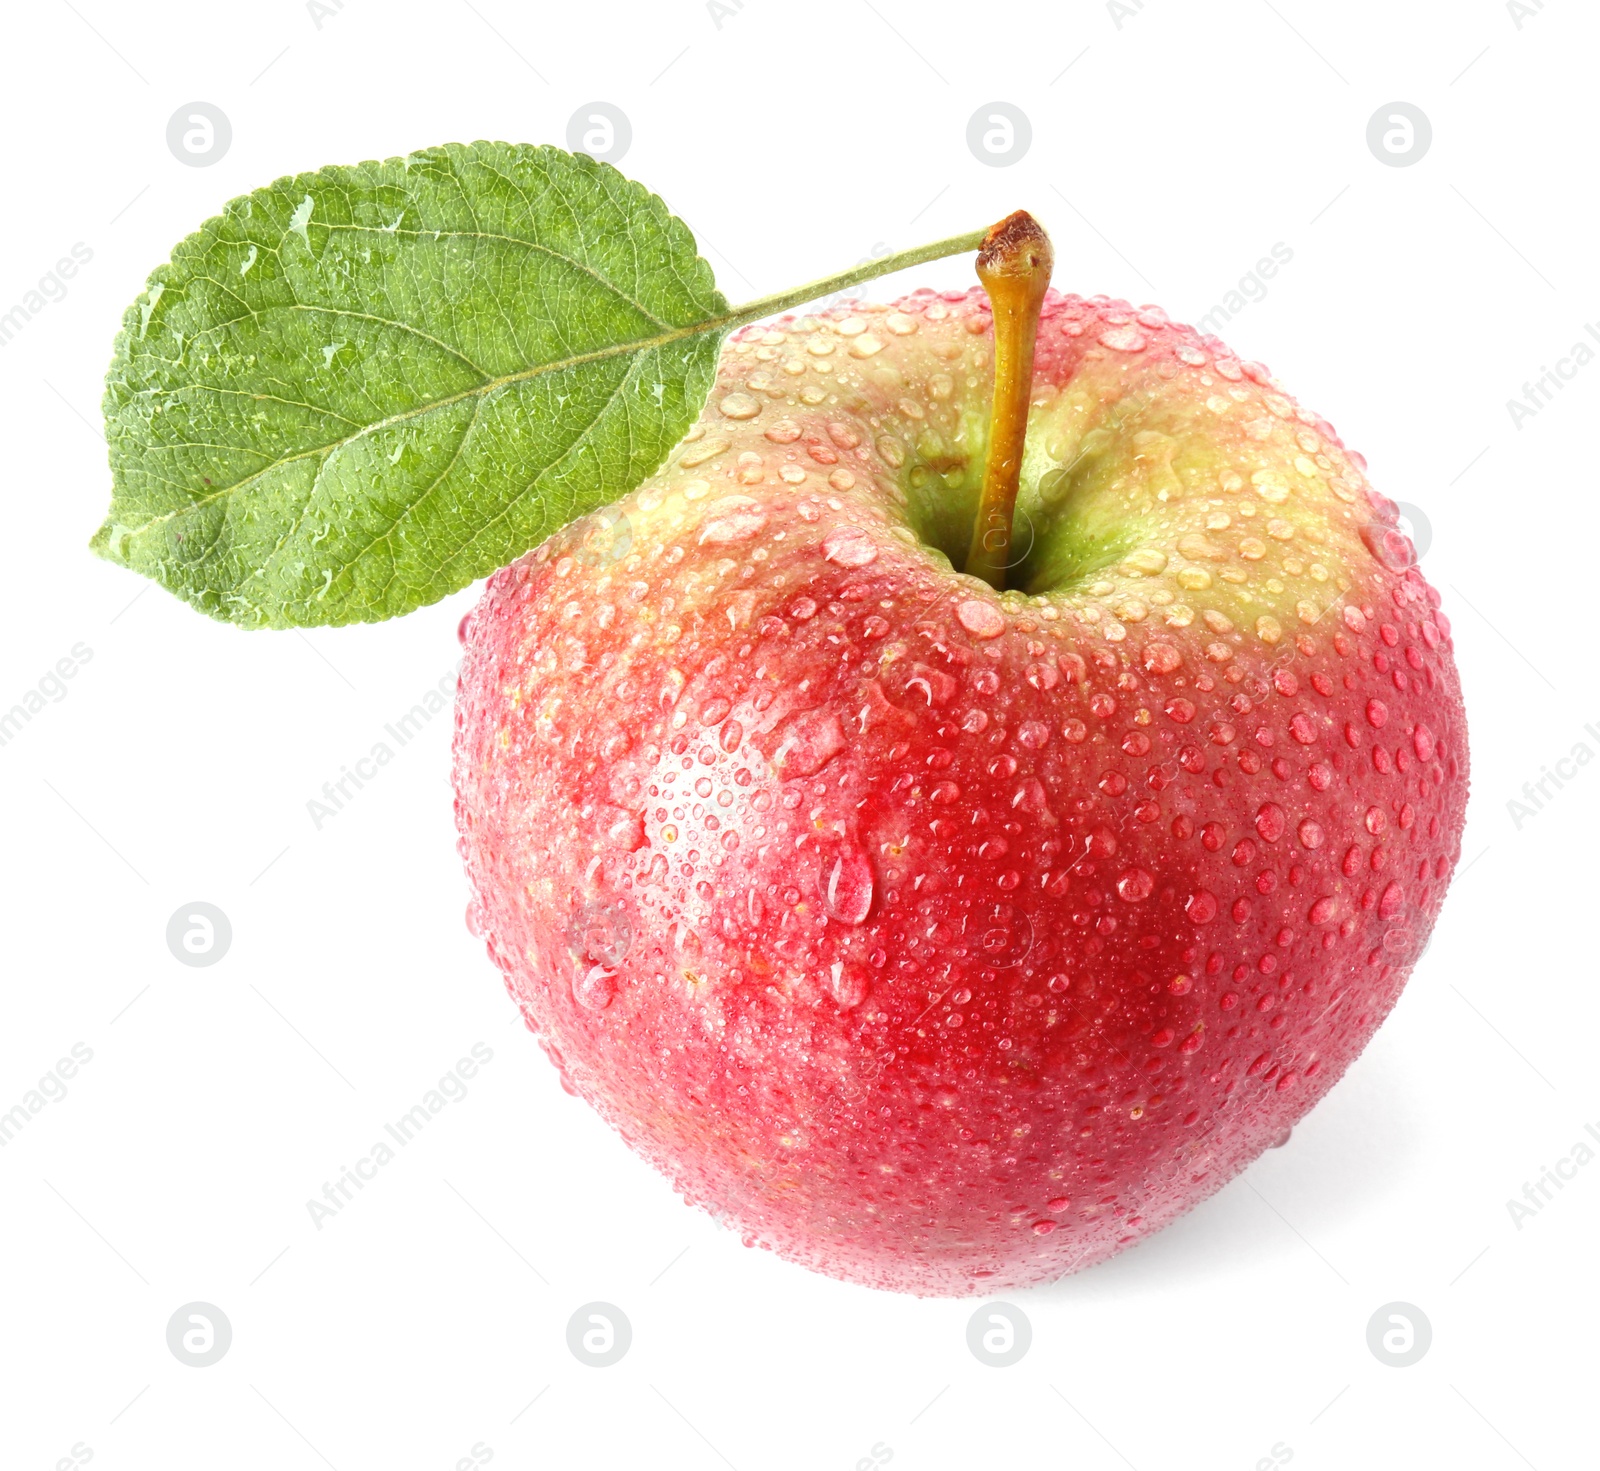 Photo of Wet ripe red apple with leaf isolated on white